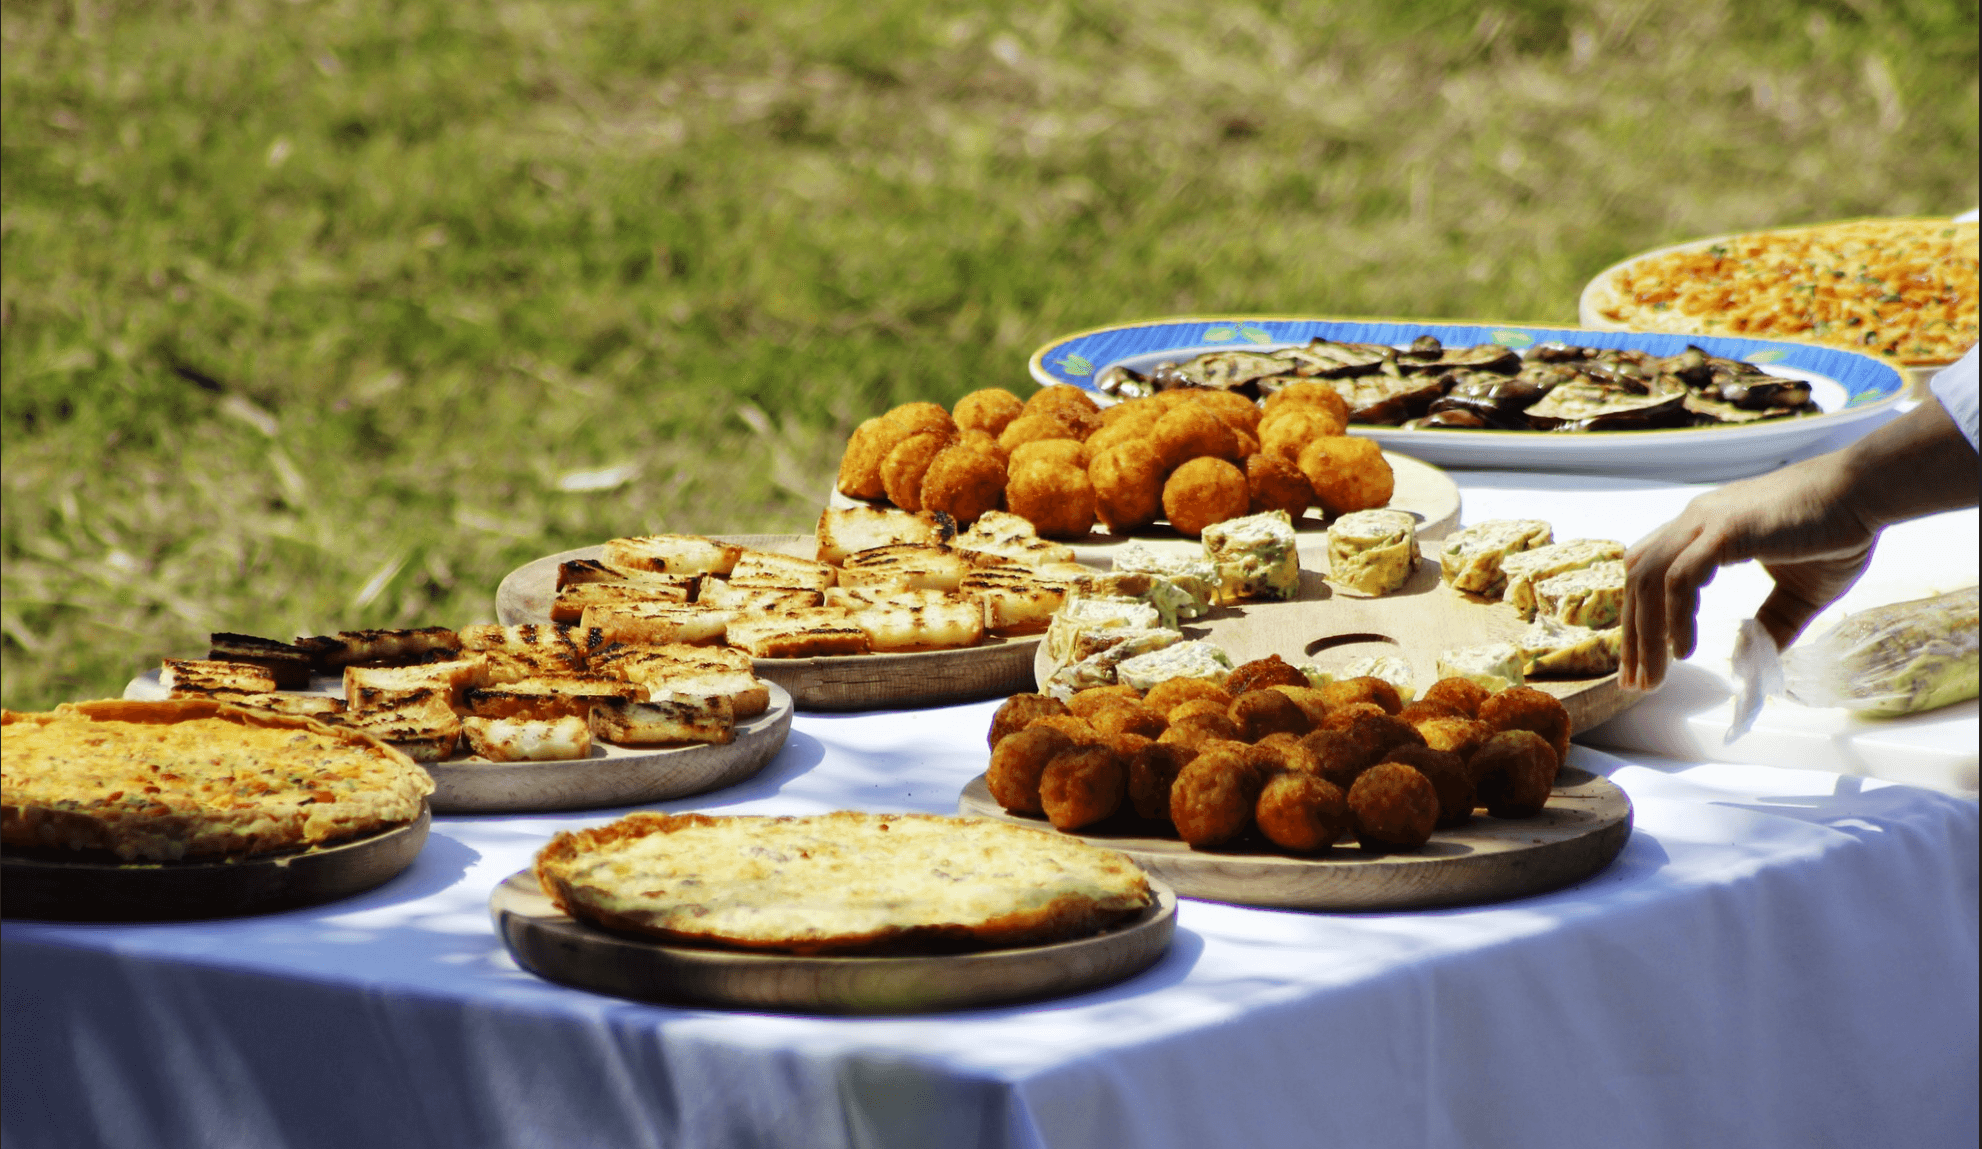 Photo of a picnic table with several dishes of food.